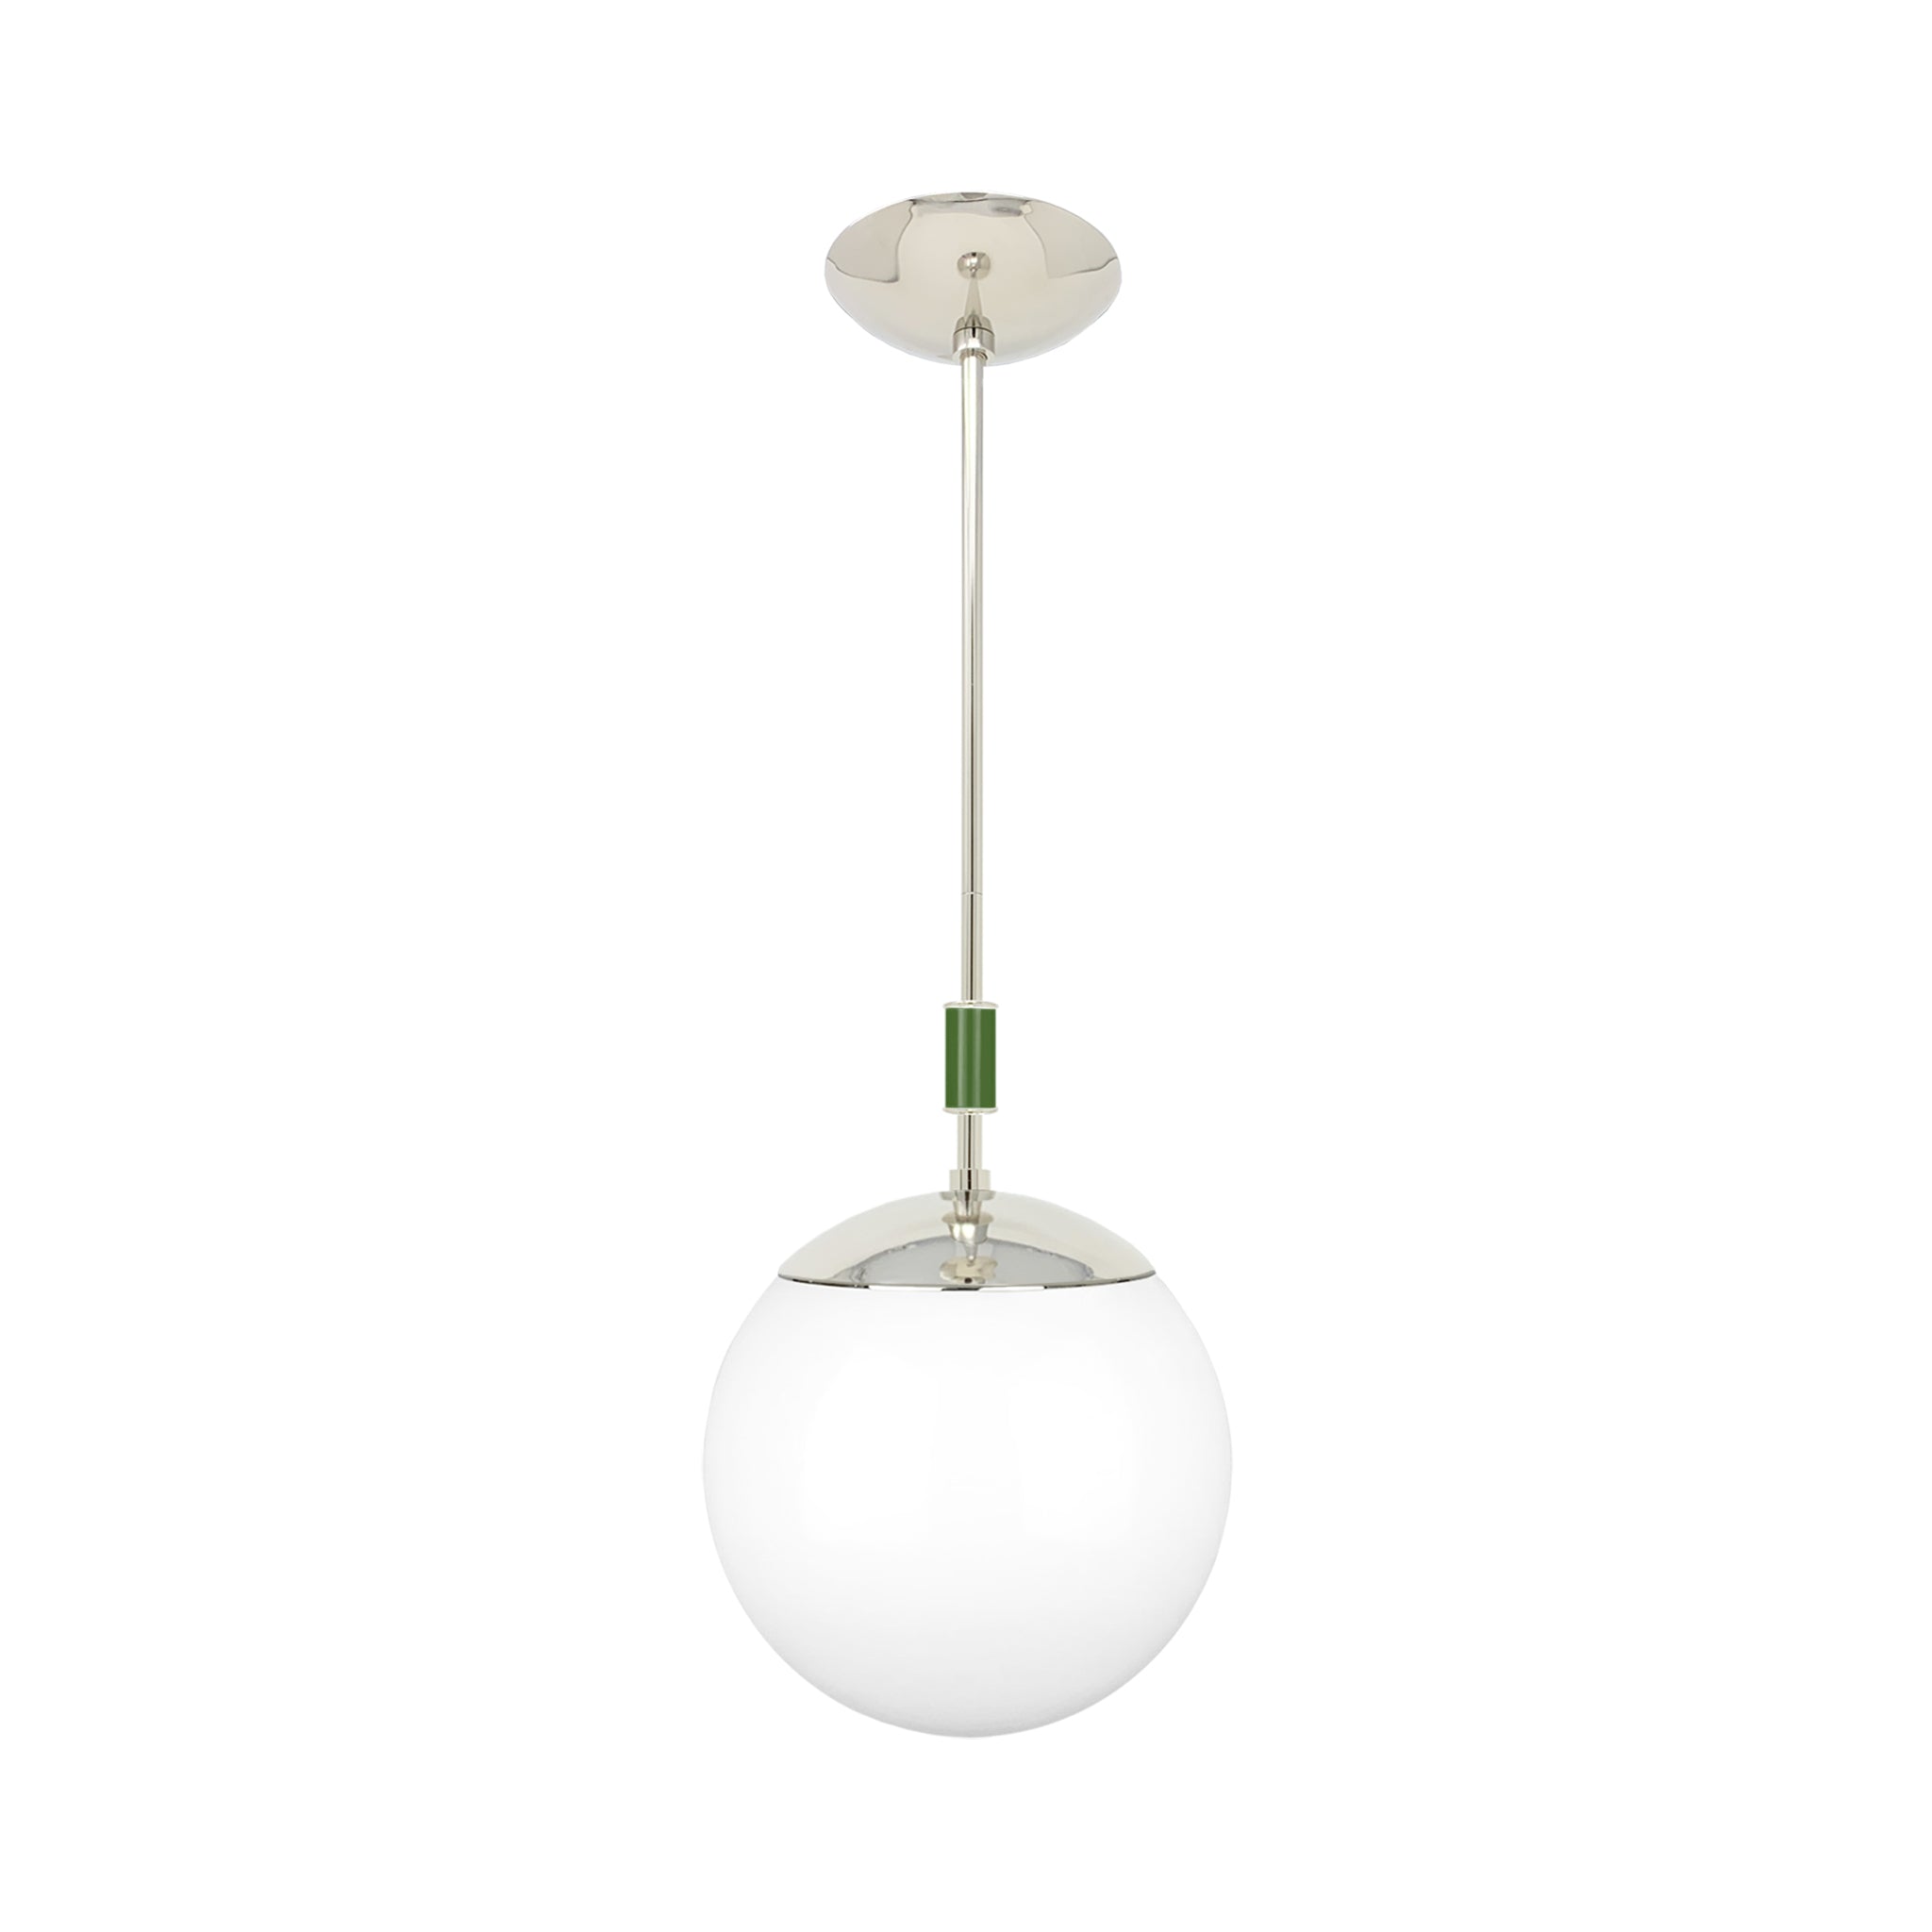 Nickel and python green color Pop pendant 10" Dutton Brown lighting